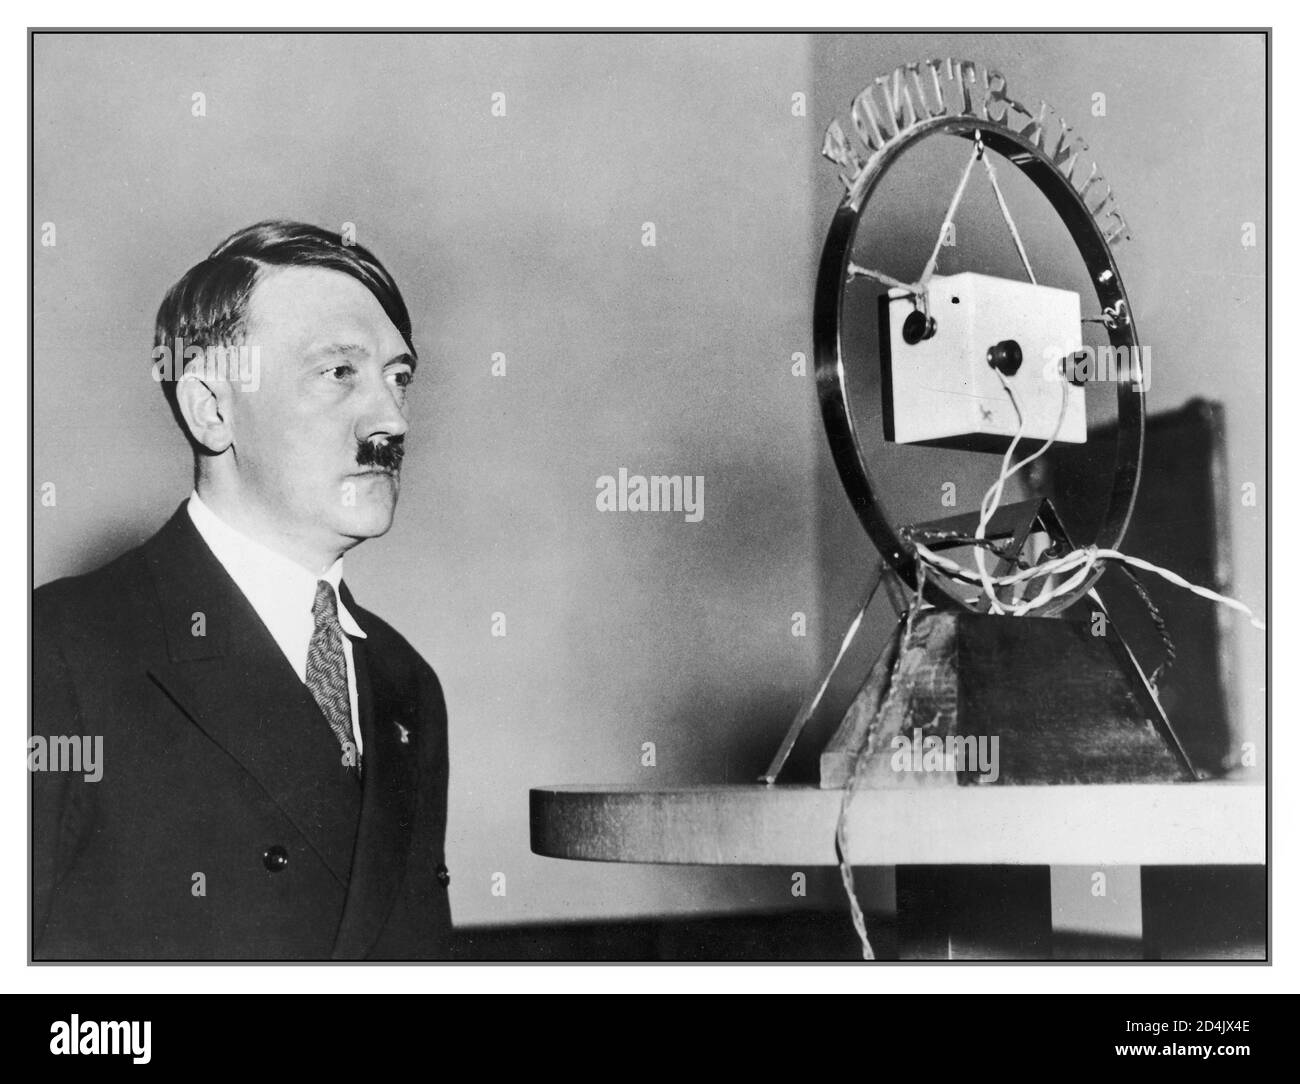 1930's Adolf Hitler addresses the German nation by radio broadcast transmission. On February 1, 1933, two days after he was appointed chancellor, Hitler spoke over the radio to the German people about his vision for the future of the country: Hitler ended his broadcast with 'Let us begin, loyal to the command of the Field-Marshal. May Almighty God favor our work, shape our will in the right way, bless our vision and bless us with the trust of our people. We have no desire to fight for ourselves; only for Germany. Stock Photo